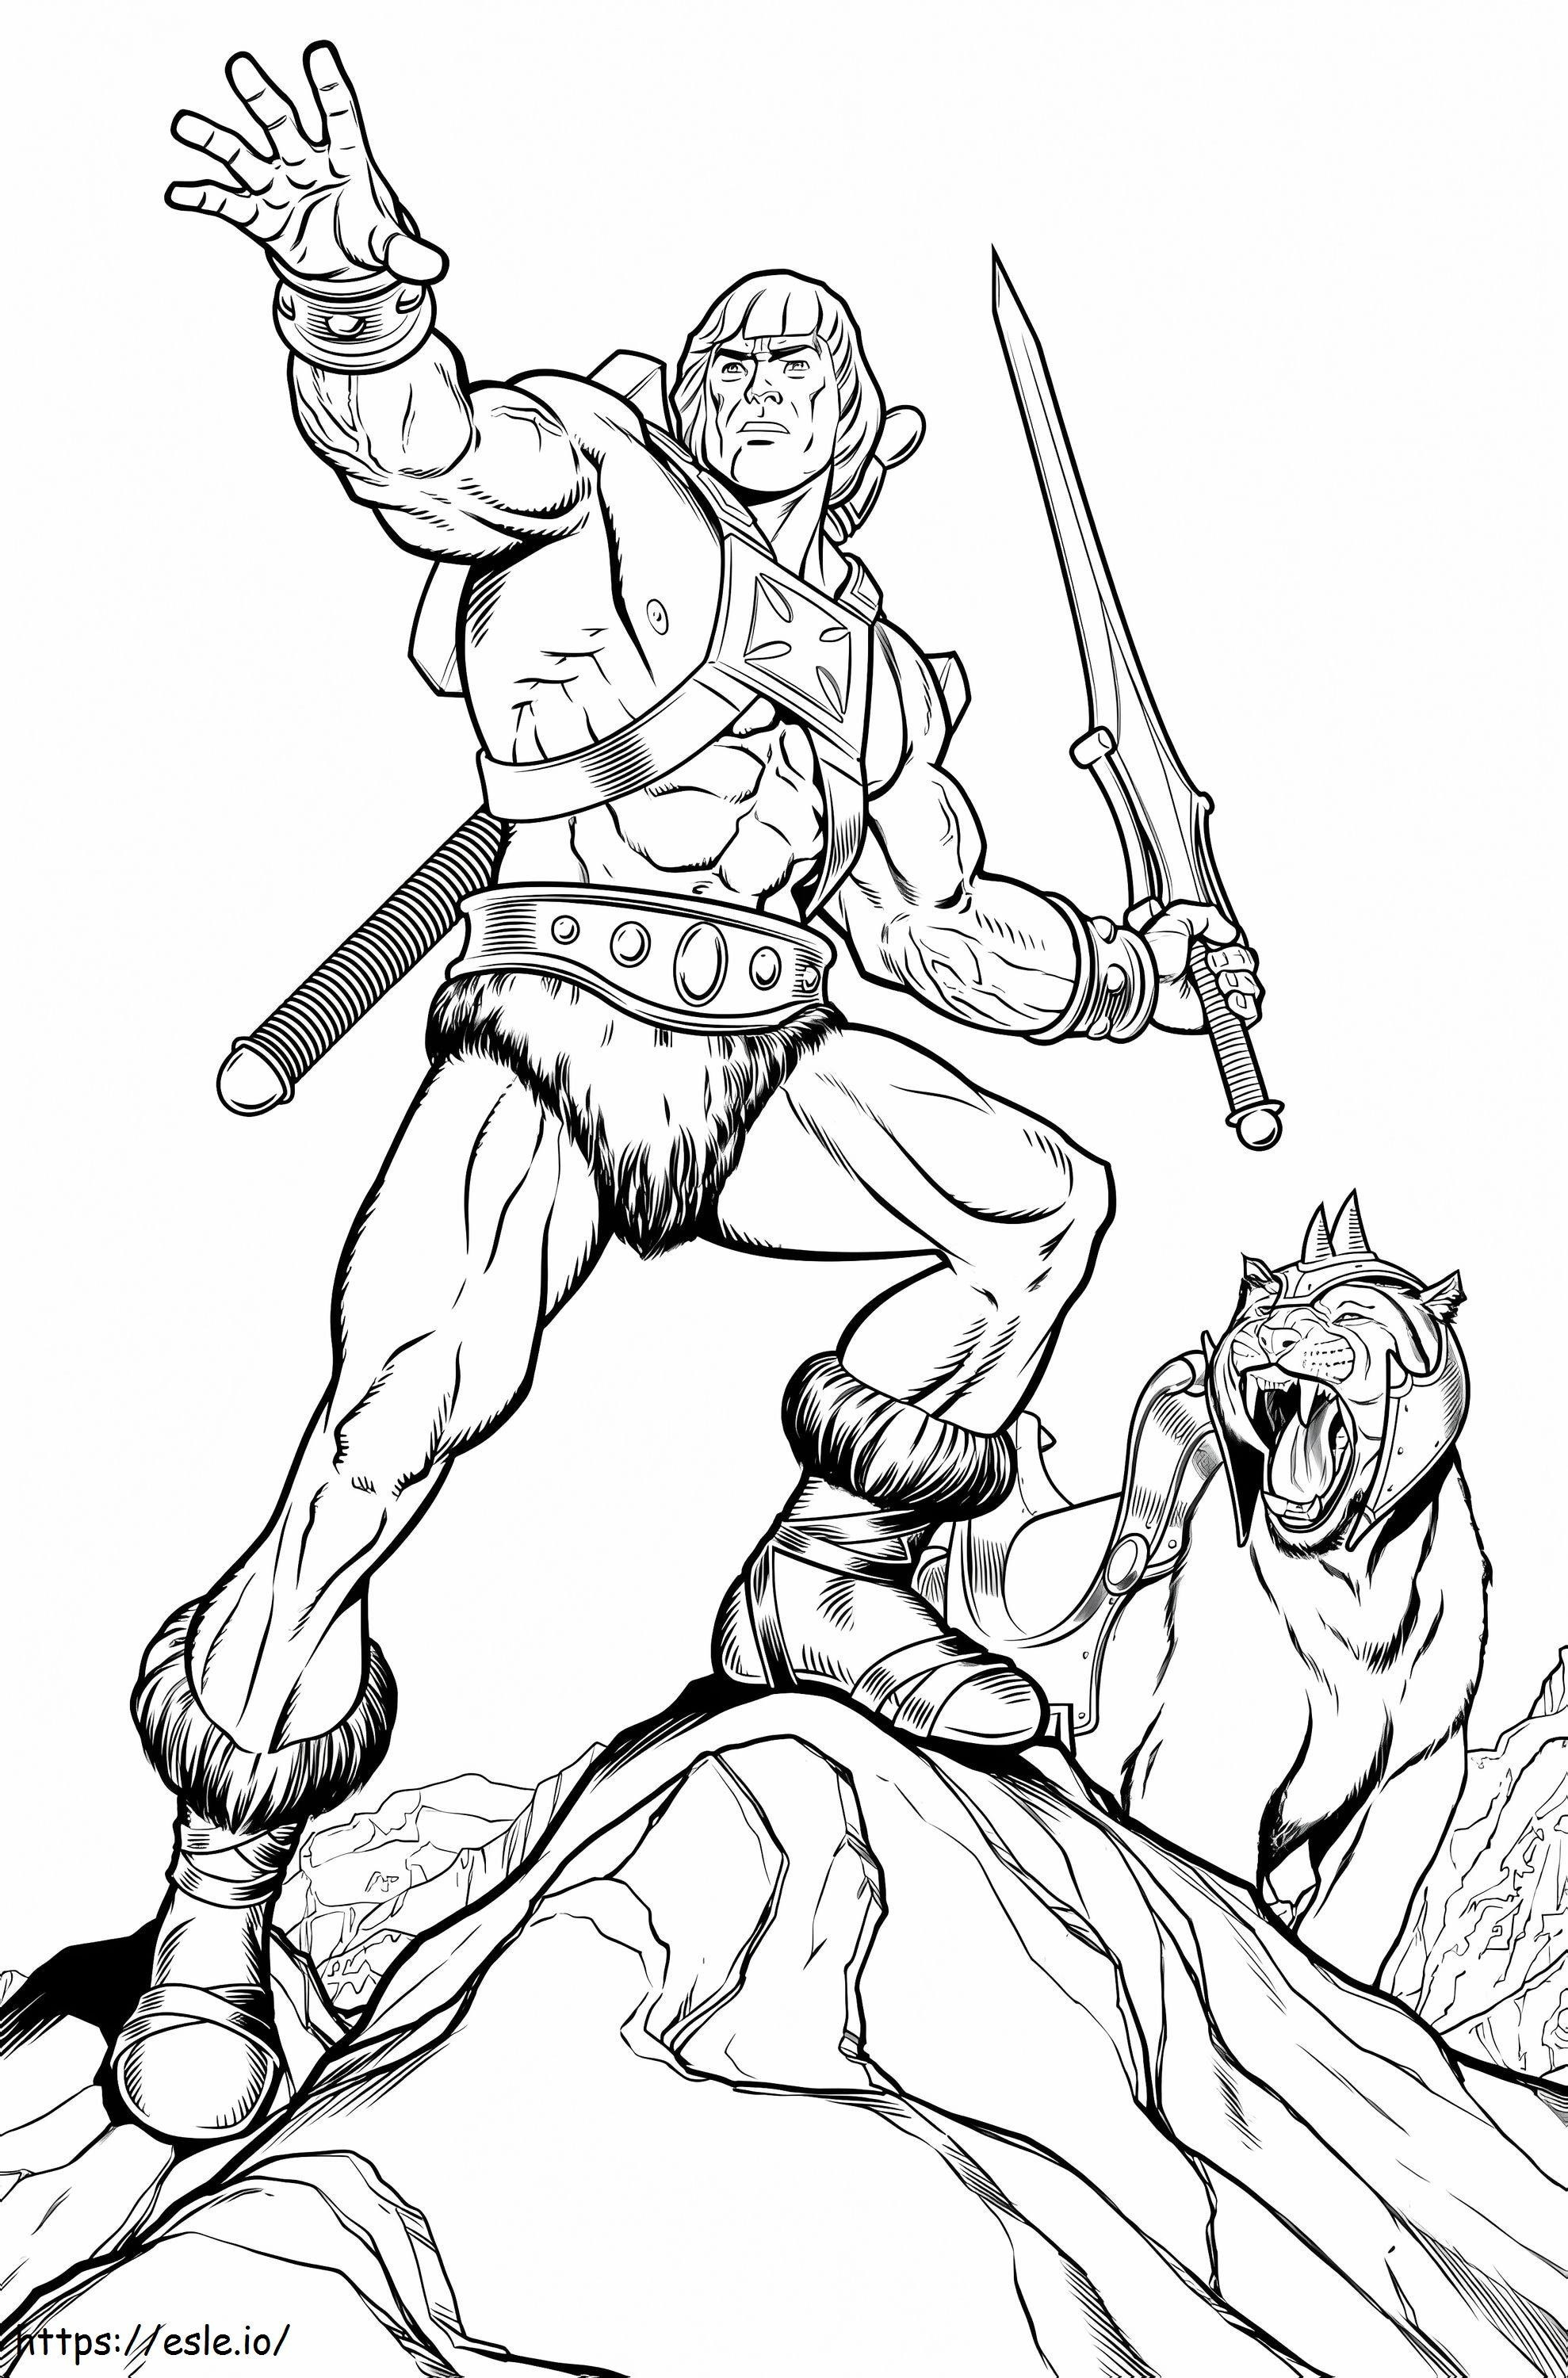 Cool He Man coloring page